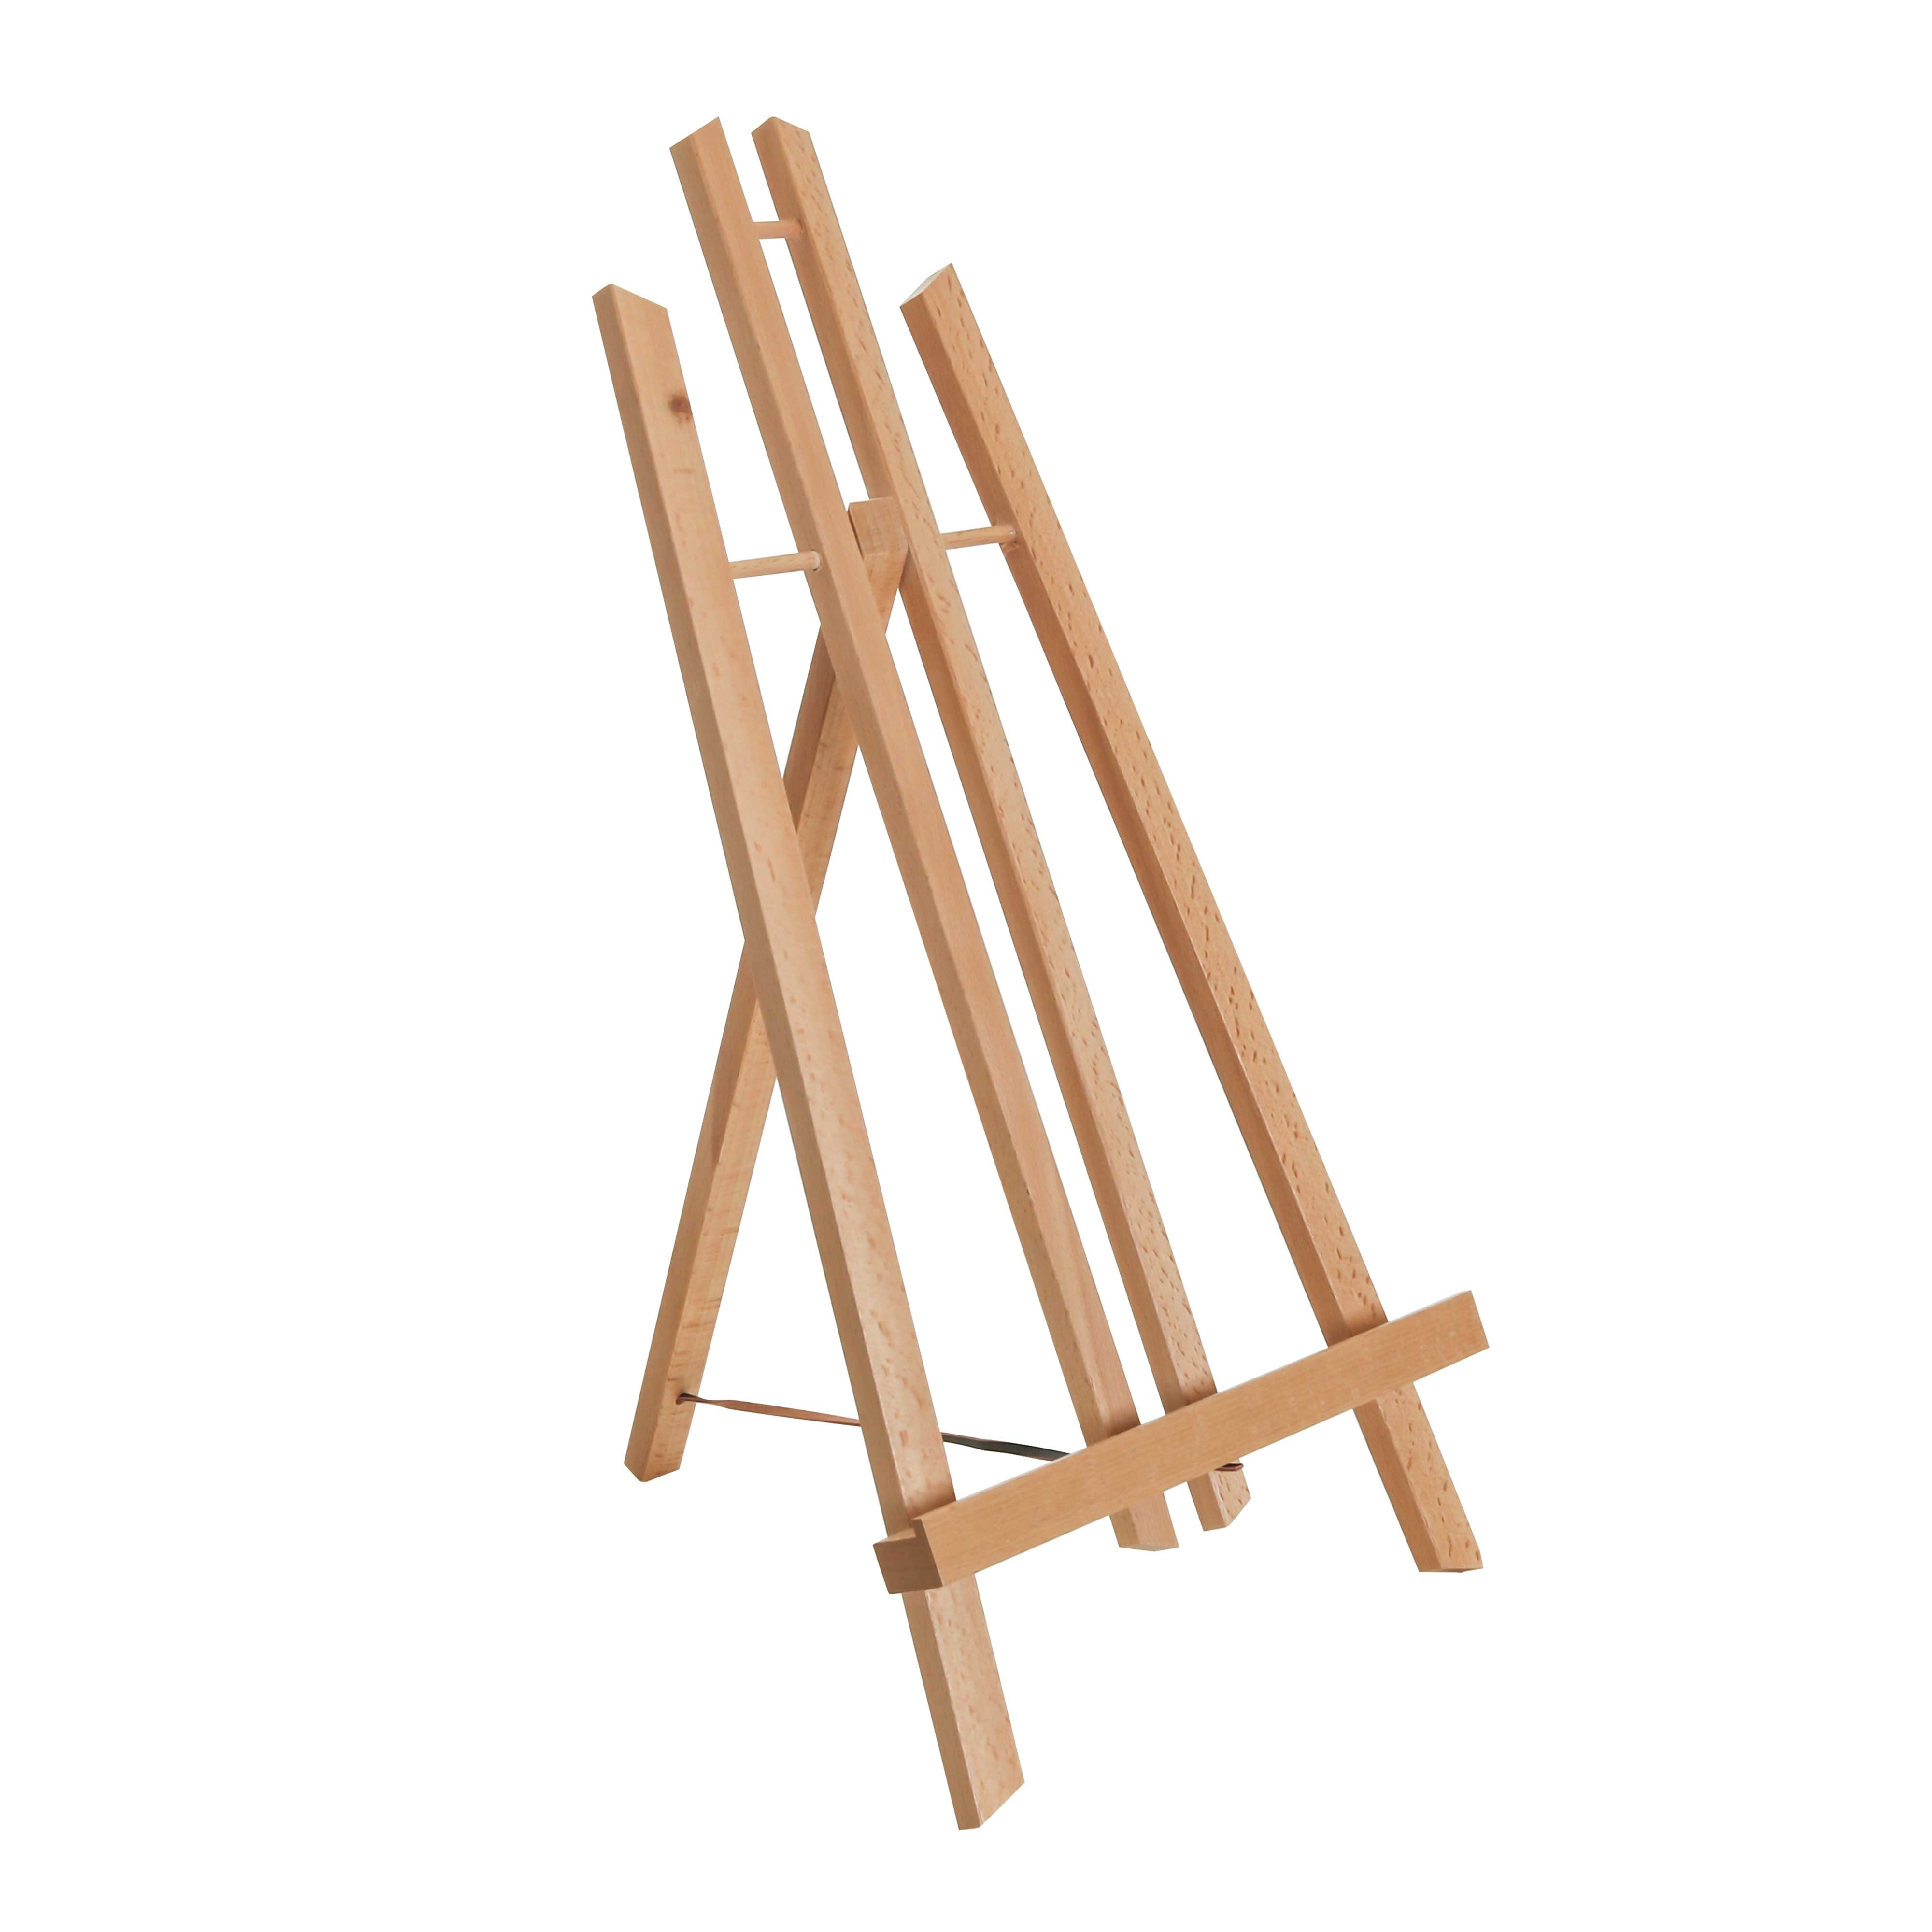 2 Pack Mini Easel Stand Table Top Easels for Painting School Supllies  Supplies for School Child 